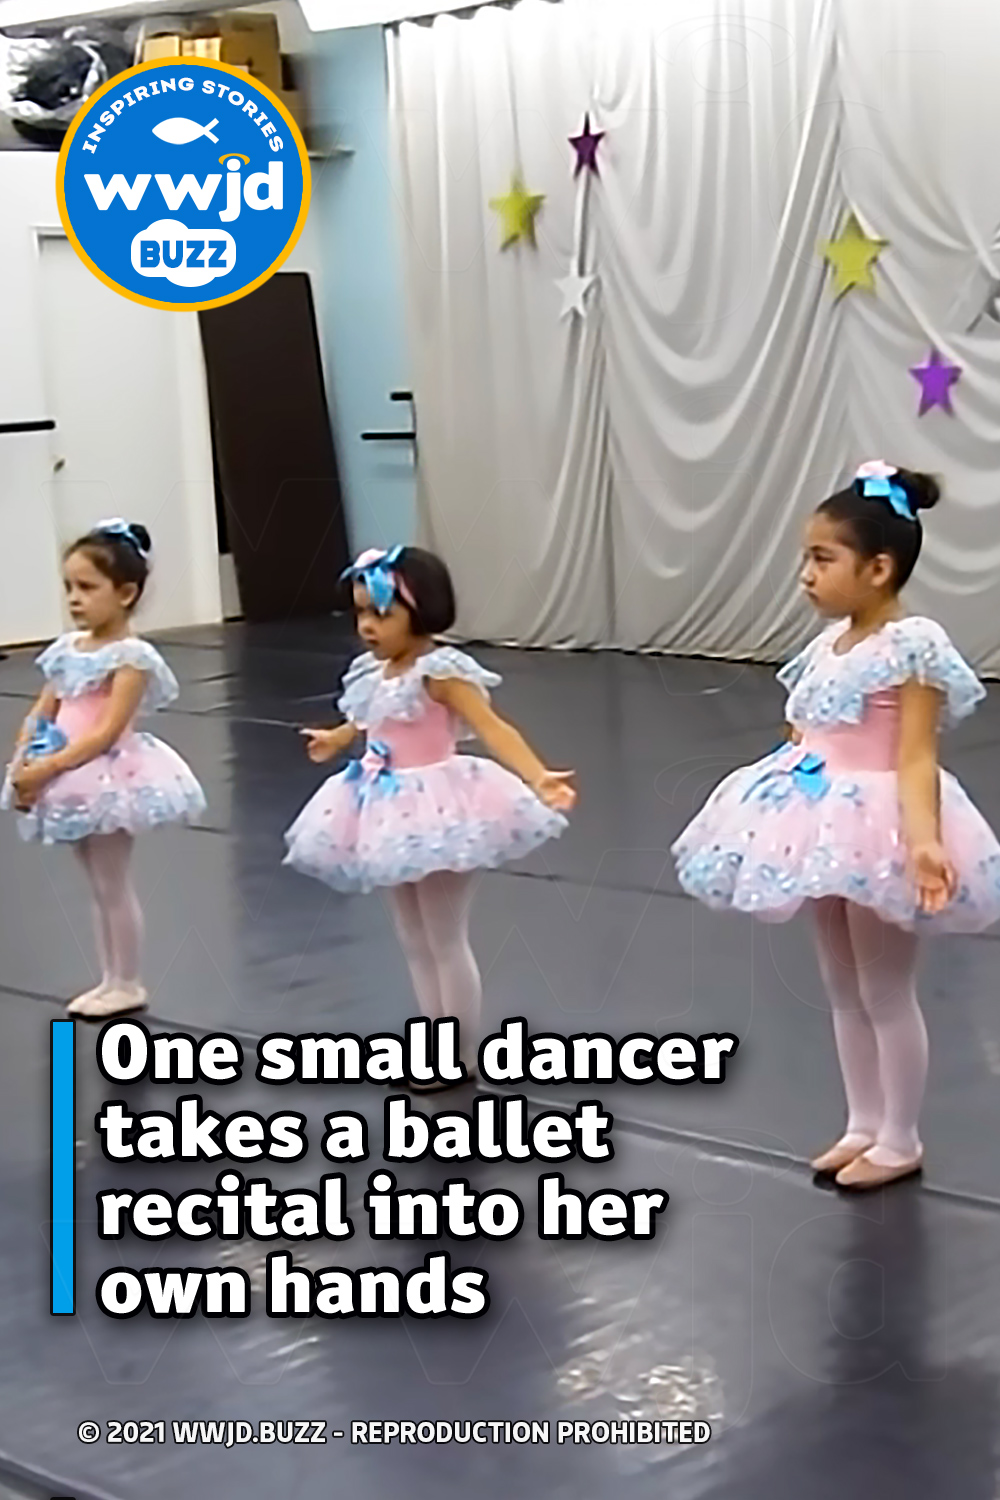 One small dancer takes a ballet recital into her own hands